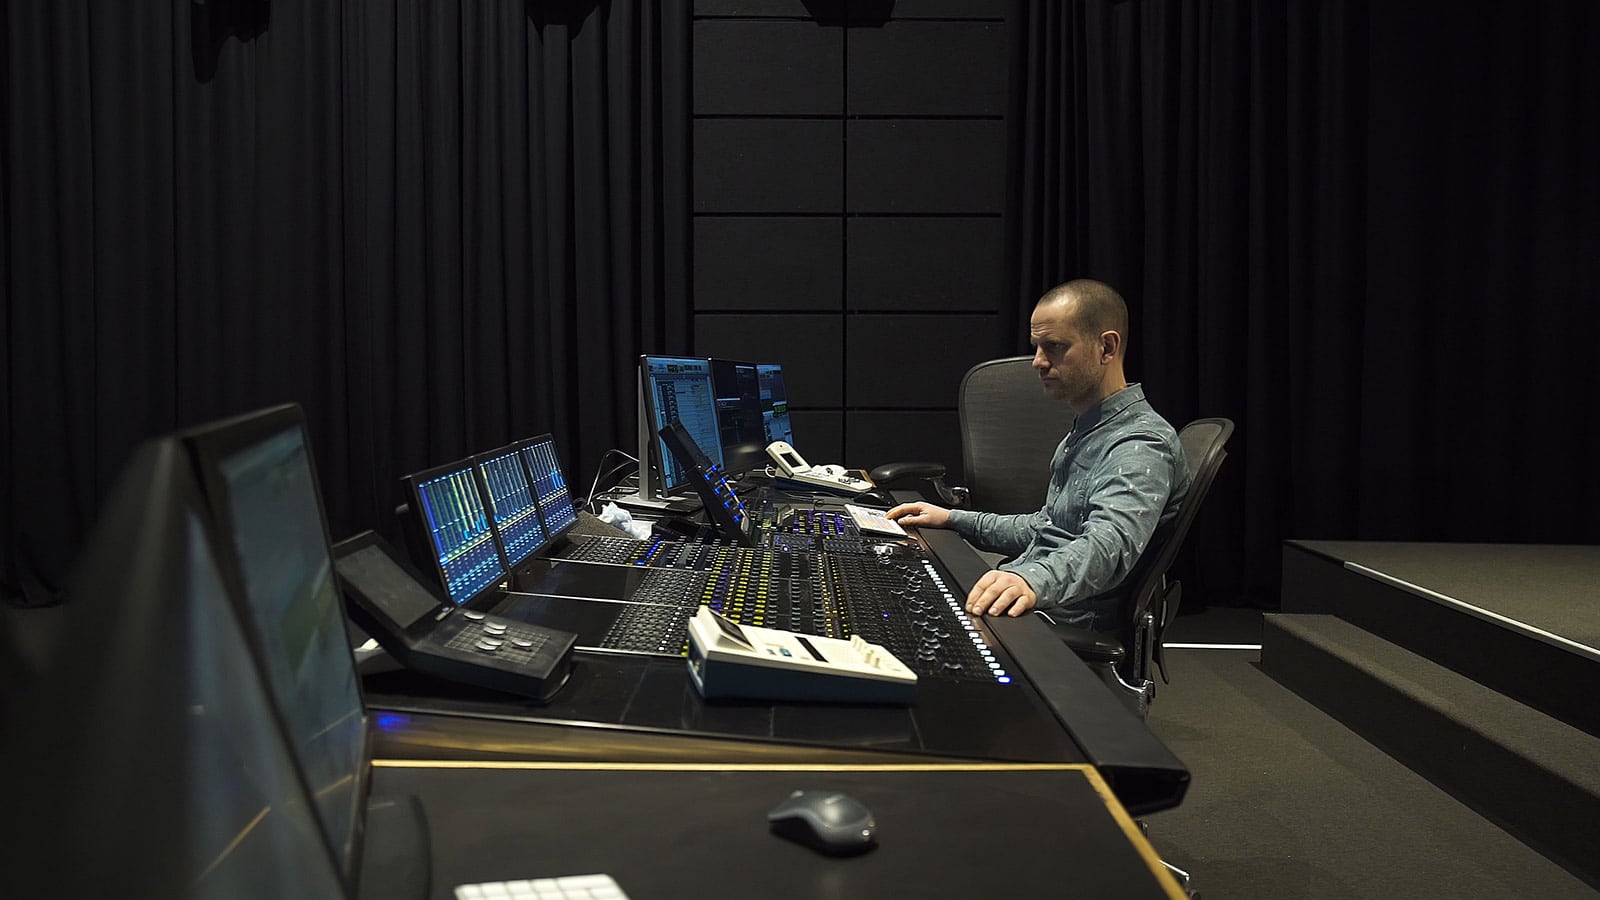 Amsterdam Studio Joins Global Family of Post-Production Facilities with Meyer Sound Monitoring